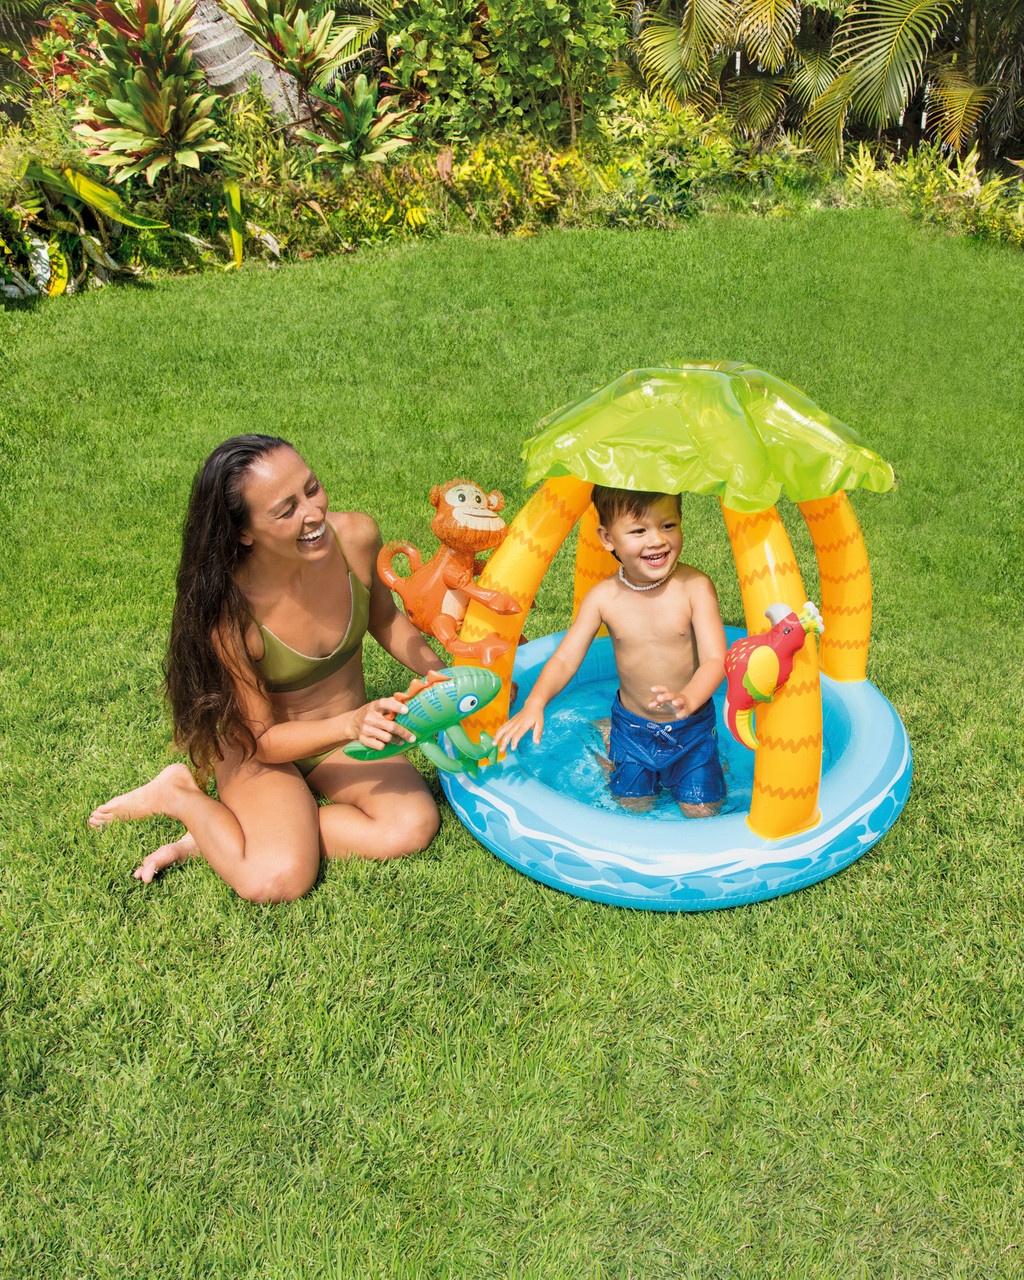 How to create a tropical paradise with your inflatable pool